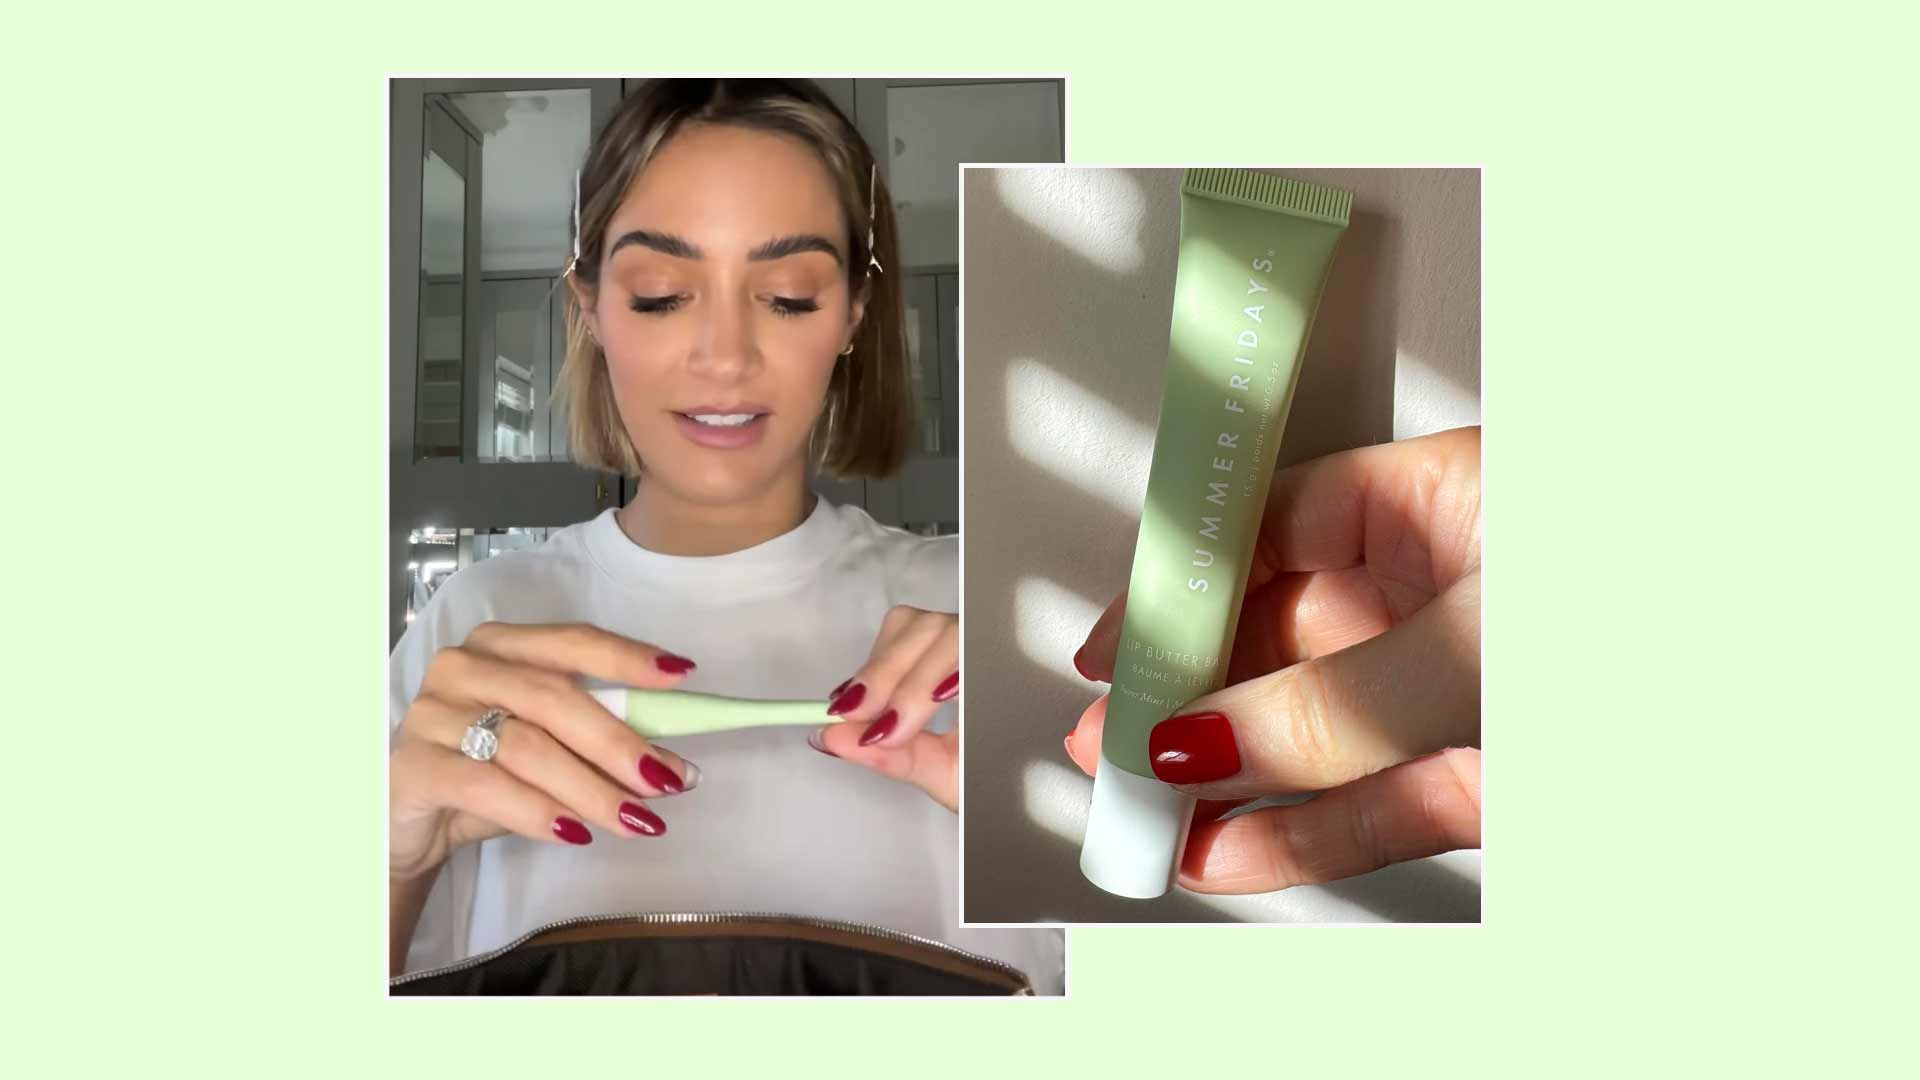 I agree with Frankie Bridge on this one - the TikTok-viral Summer Fridays Lip Butter Balm is a game changer